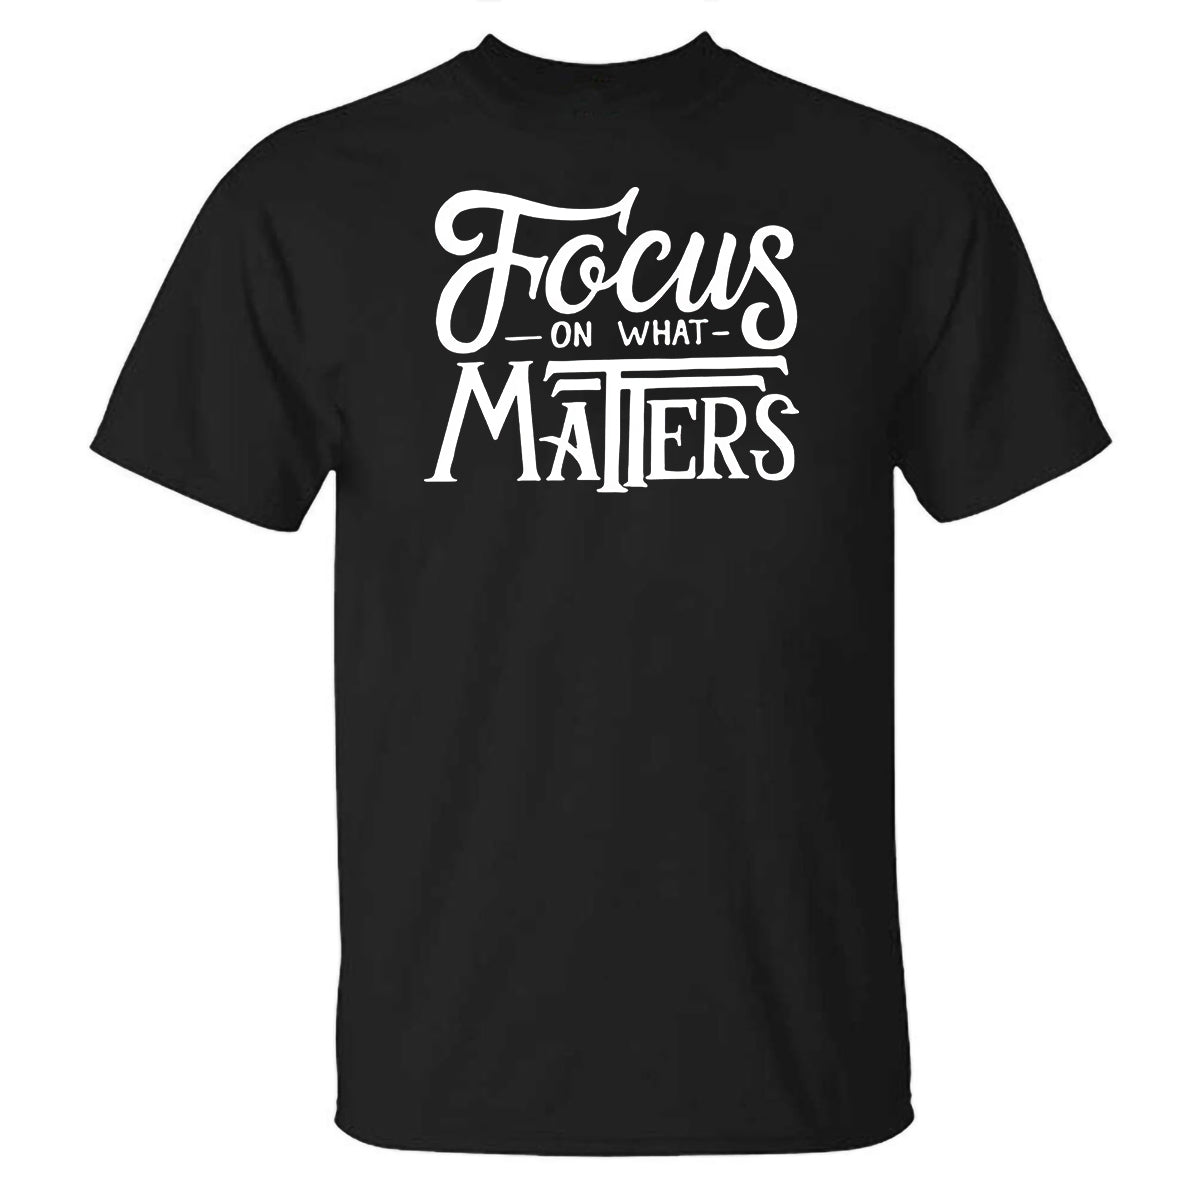 Focus On What Matters Printed Men's T-shirt